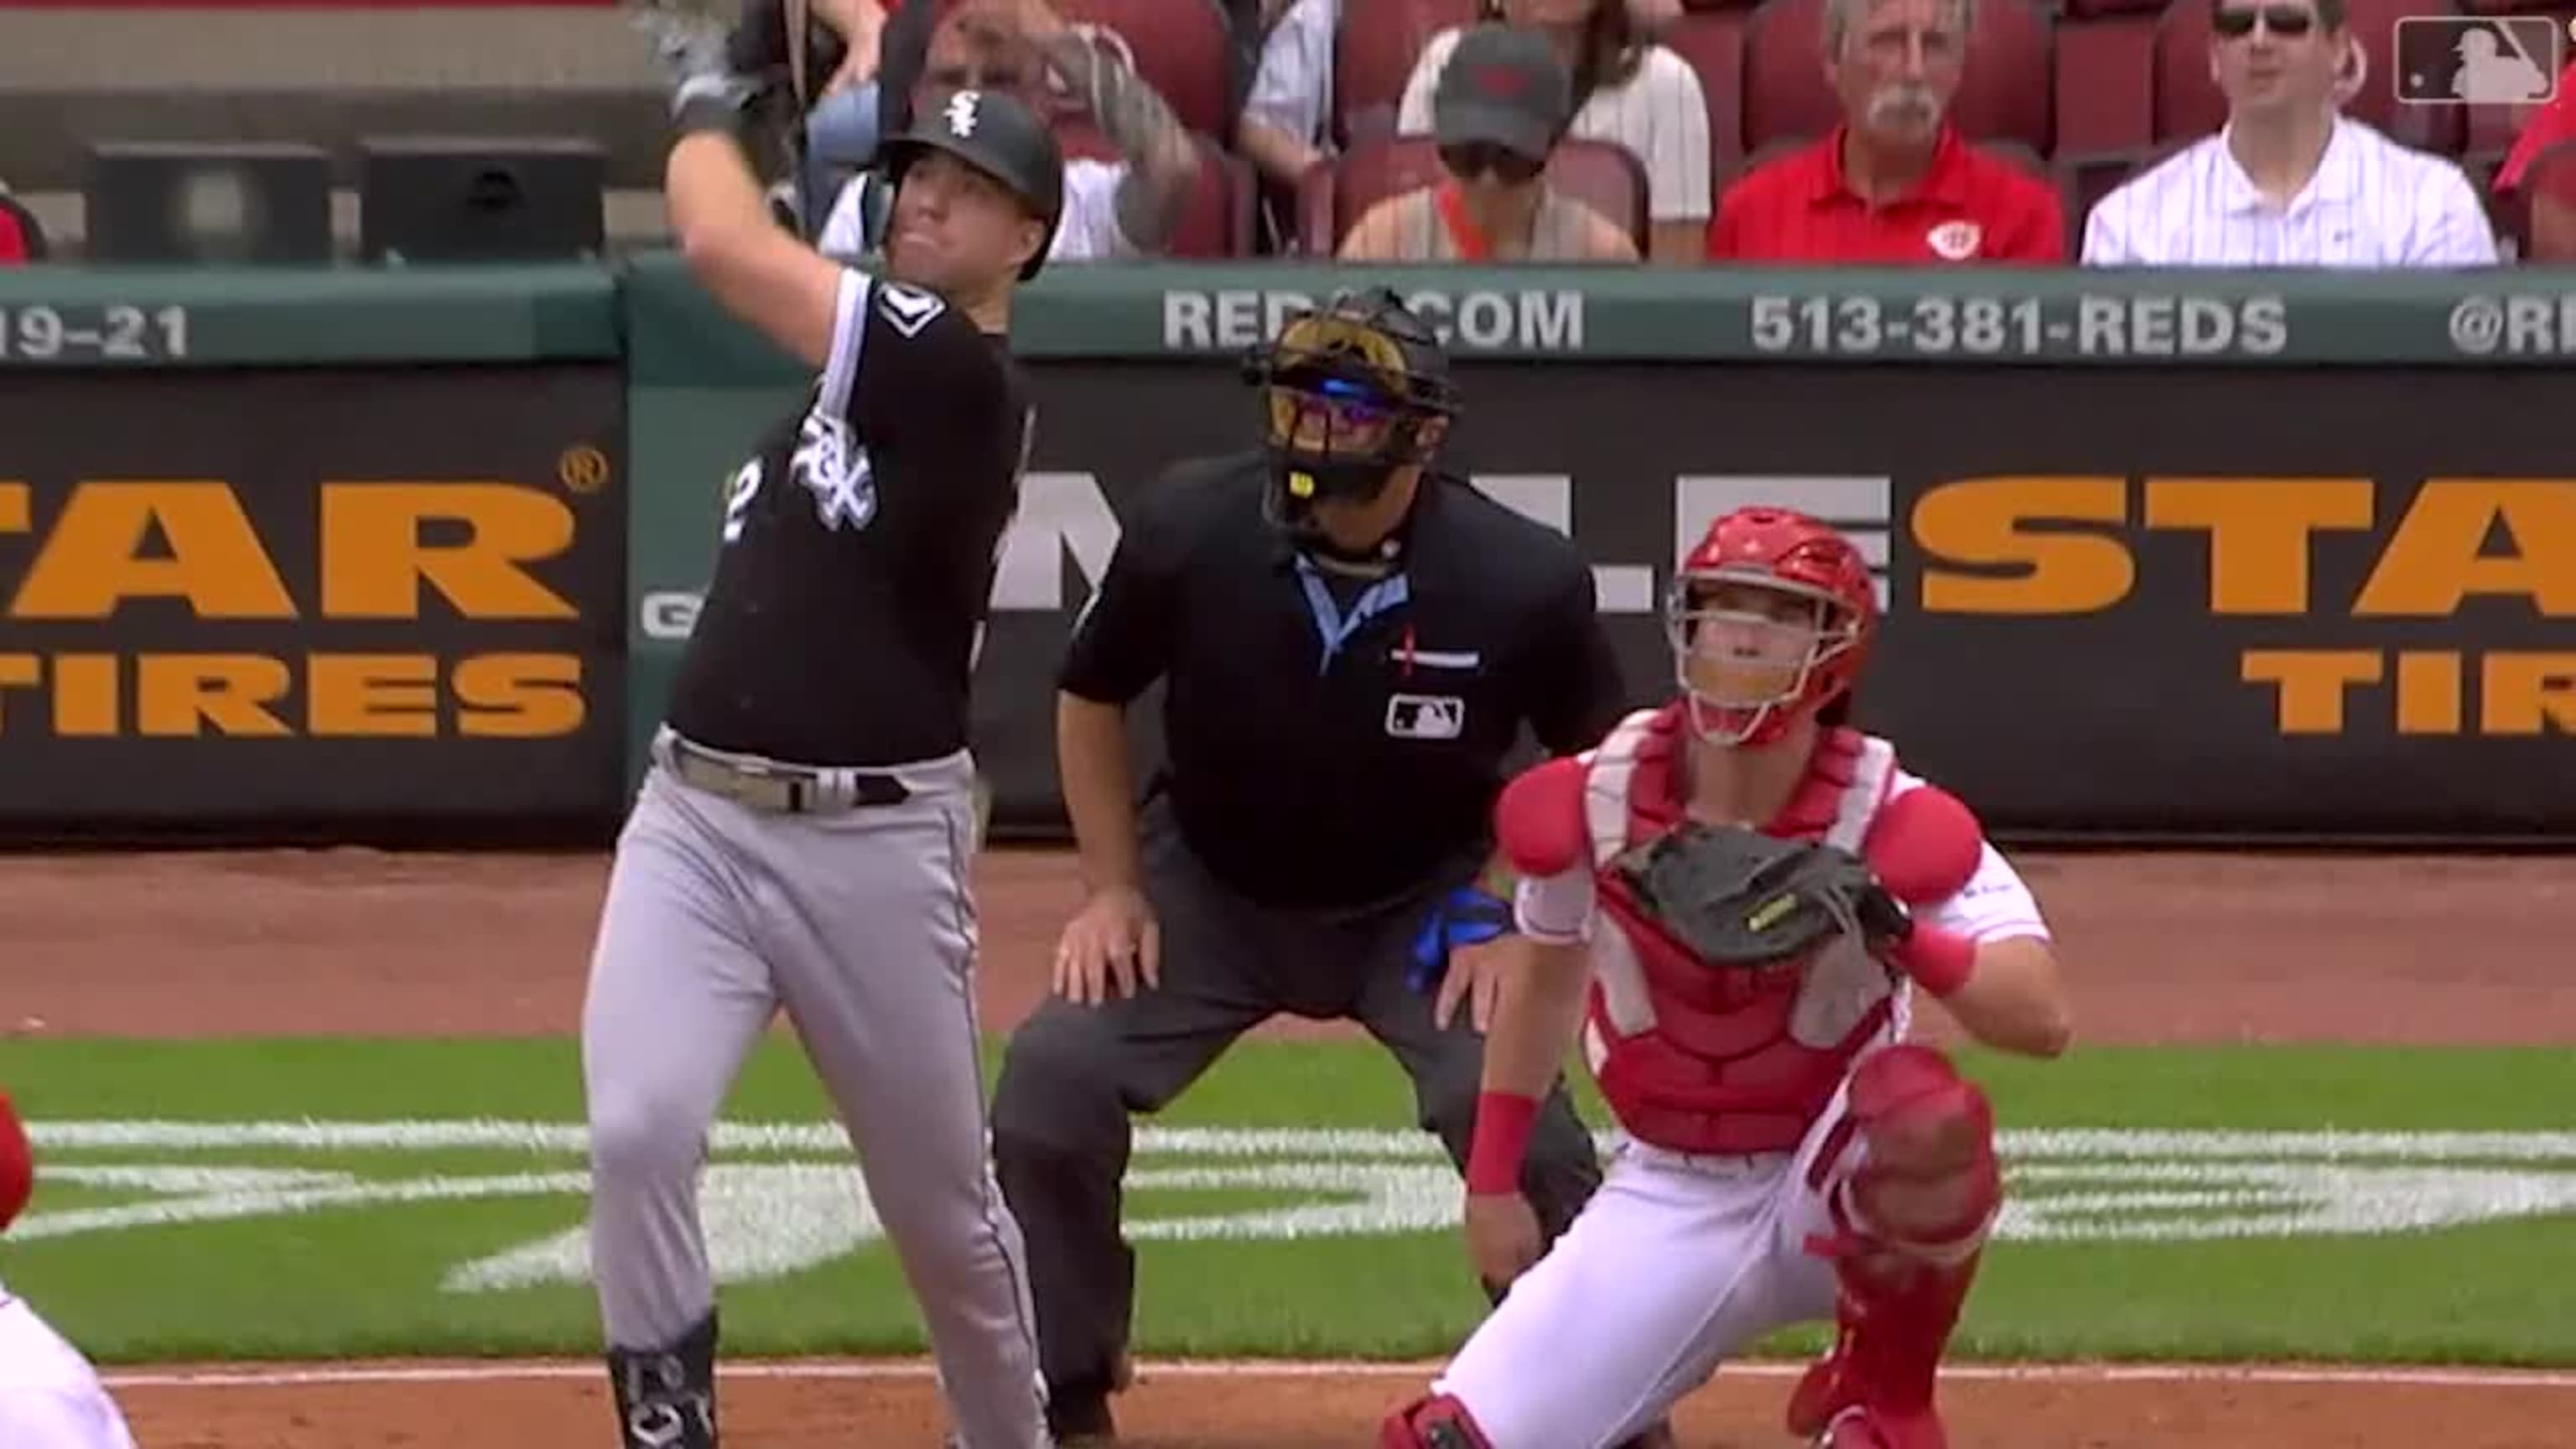 White Sox score 11 in 2nd, beat Reds 17-4 - Record Herald